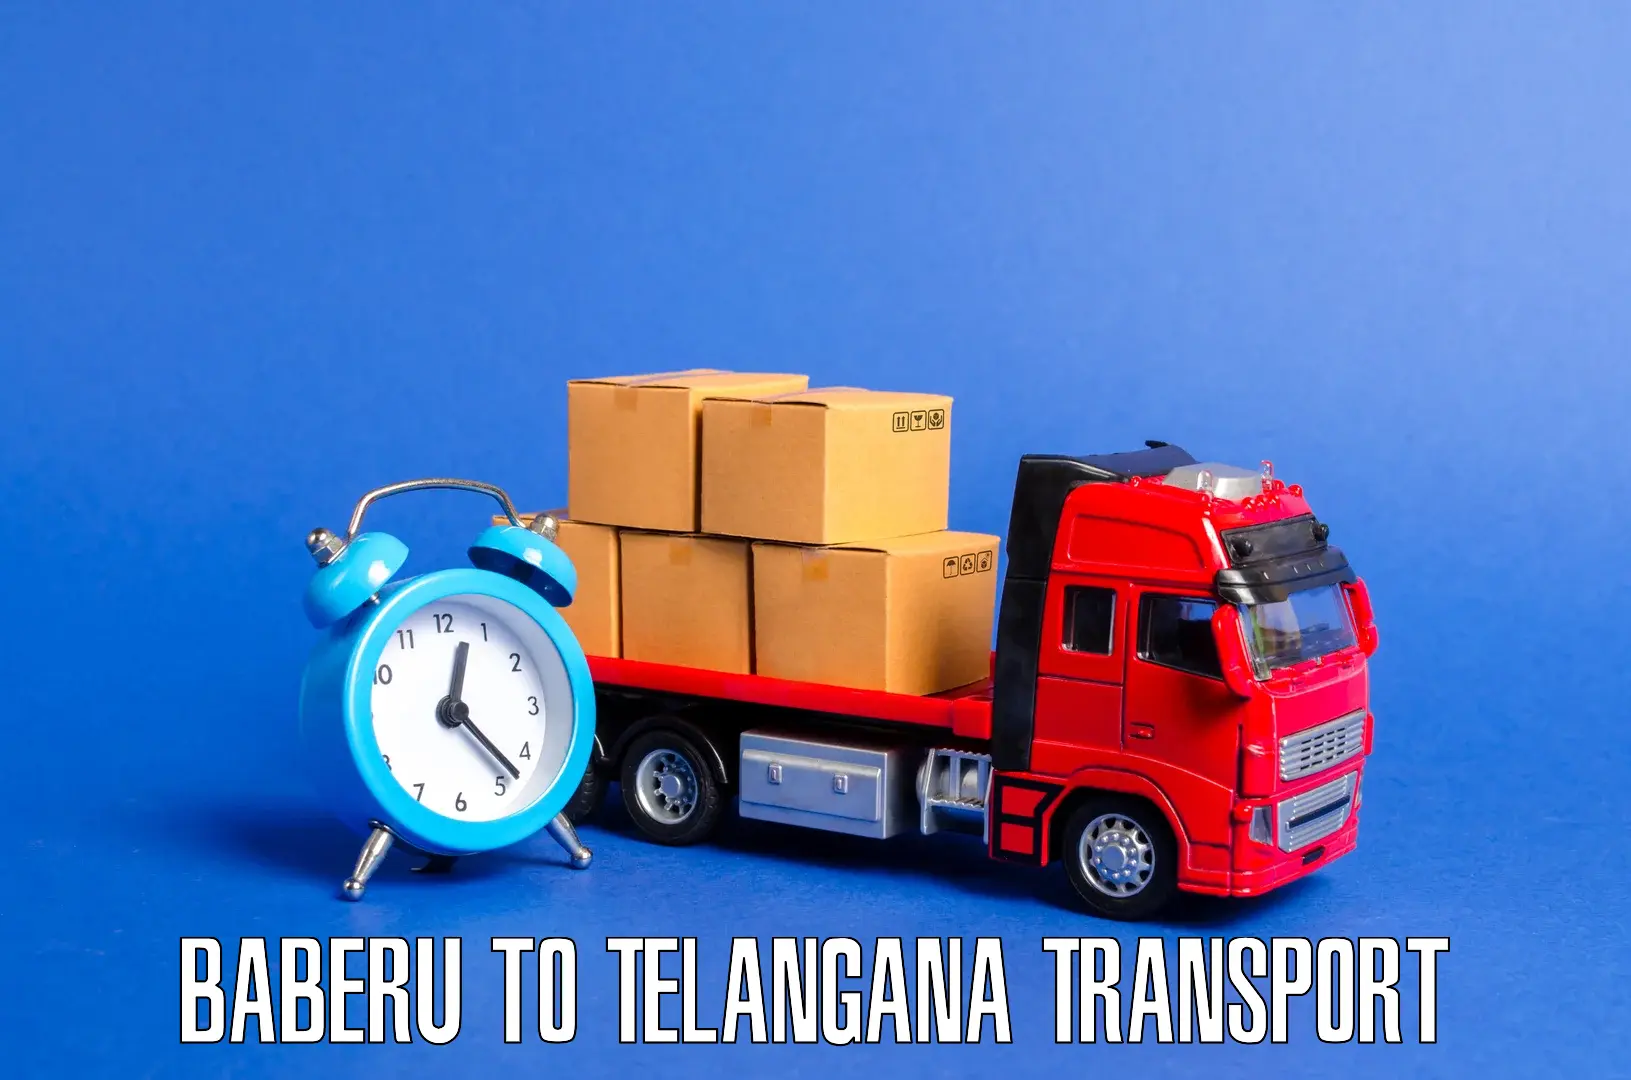 All India transport service Baberu to Secunderabad